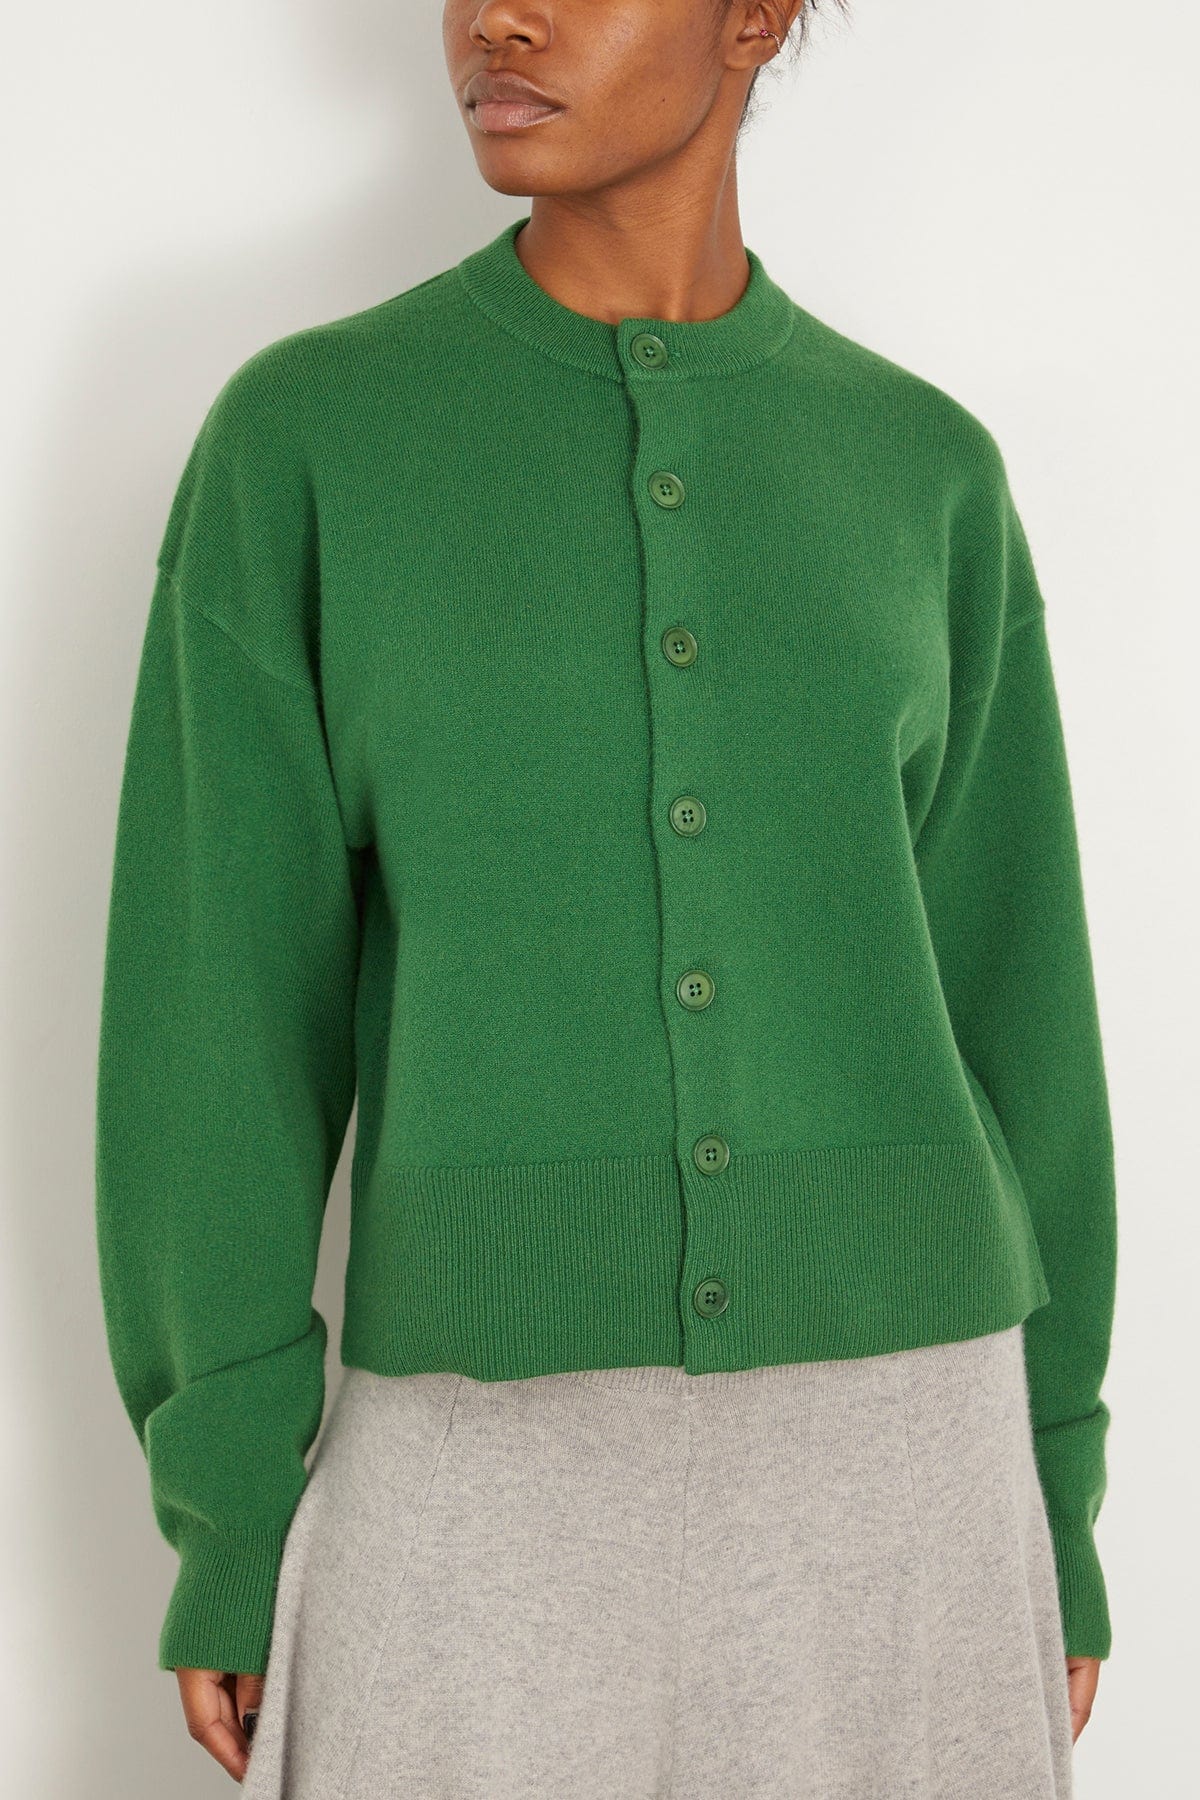 Extreme Cashmere Sweaters Chou Cardigan in Weed Extreme Cashmere Chou Cardigan in Weed